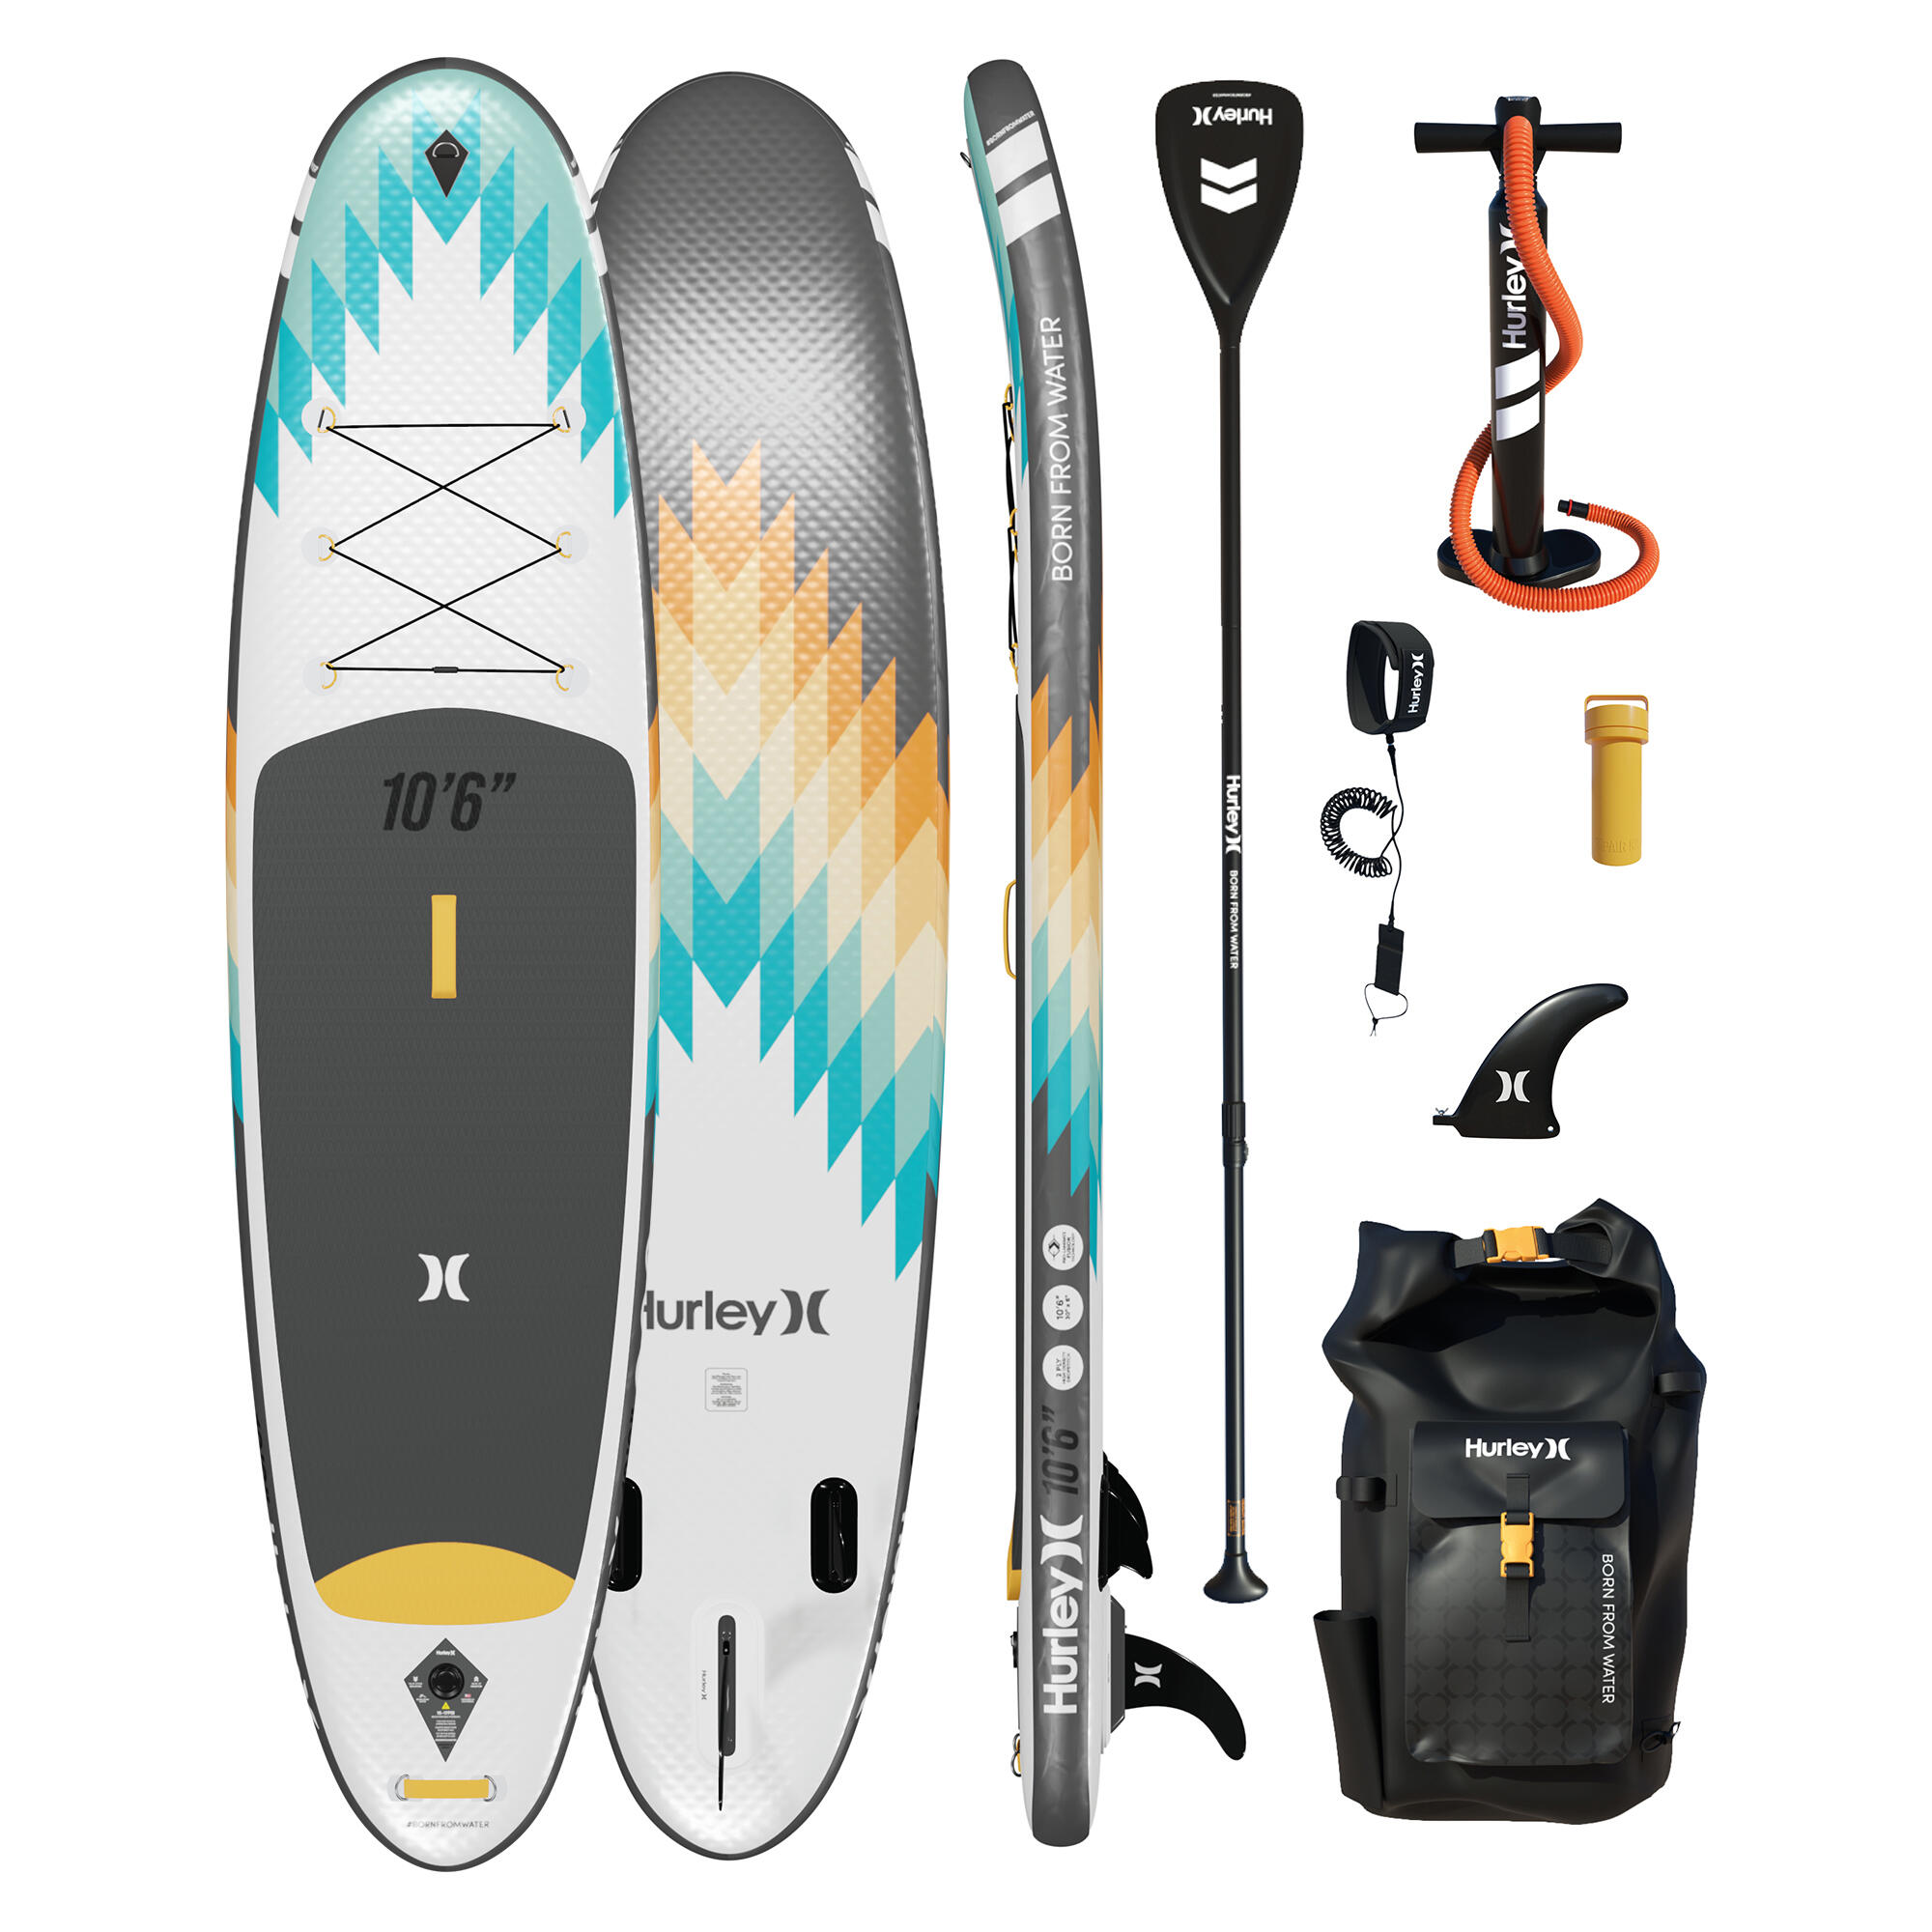 HURLEY Hurley Advantage OUTSIDER 10'6 Inflatable Paddle Board Package